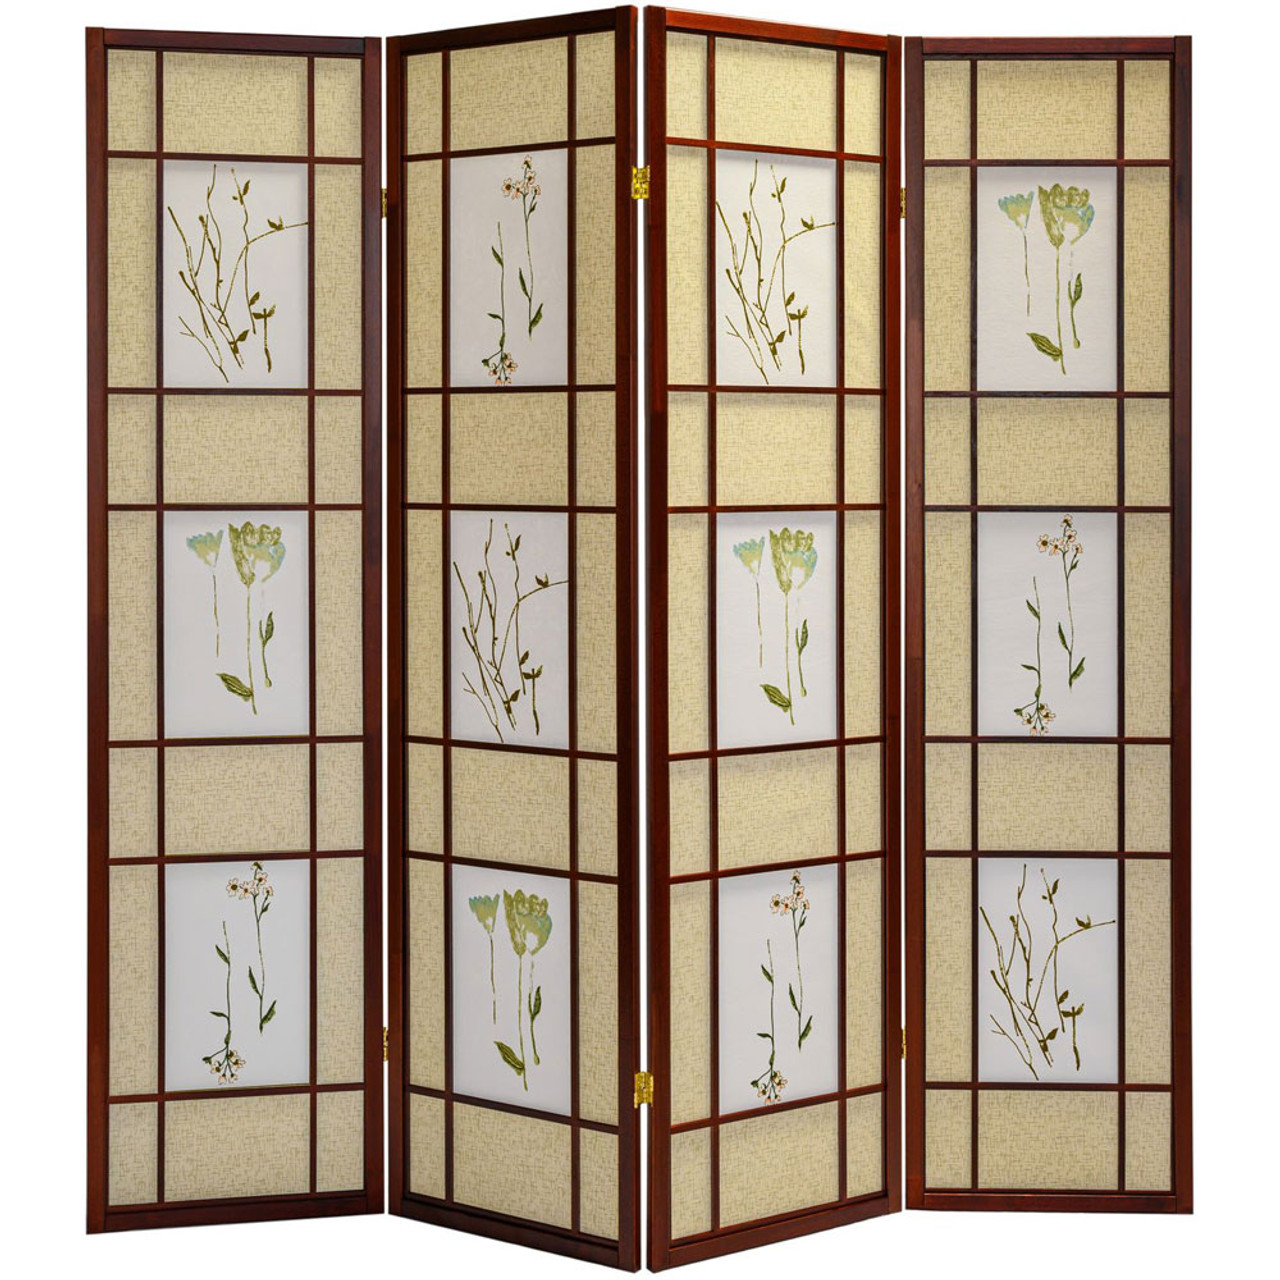 3 or 4 Panels Room Divider Privacy Screen Floral Botanical Print Cherry